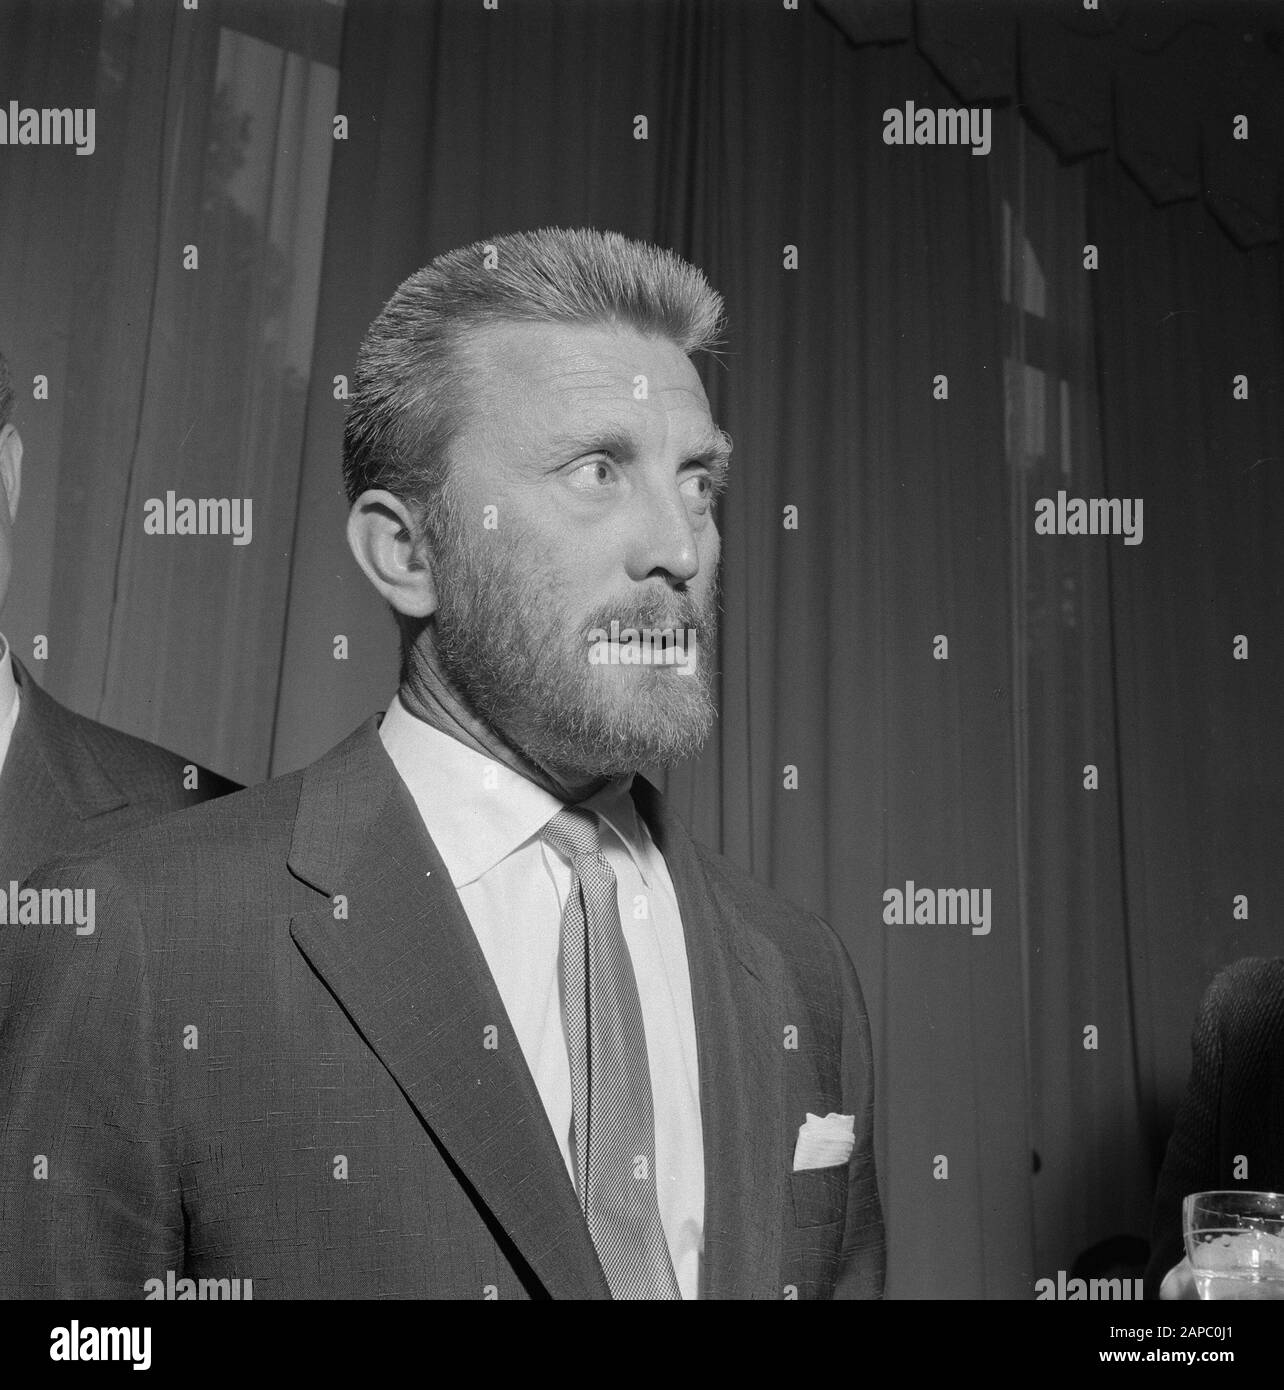 American film star Kirk Douglas in Amsterdam. He is the Netherlands for recordings of the film Lust for Life (directed by Vincente Minelli) about the life of Vincent van Gogh Date: 7 September 1955 Location: Amsterdam, Noord-Holland Keywords: actors, films, film stars, portraits, actors Personal name: Douglas Kirk, Gogh Vincent van, Minelli Vincente Stock Photo